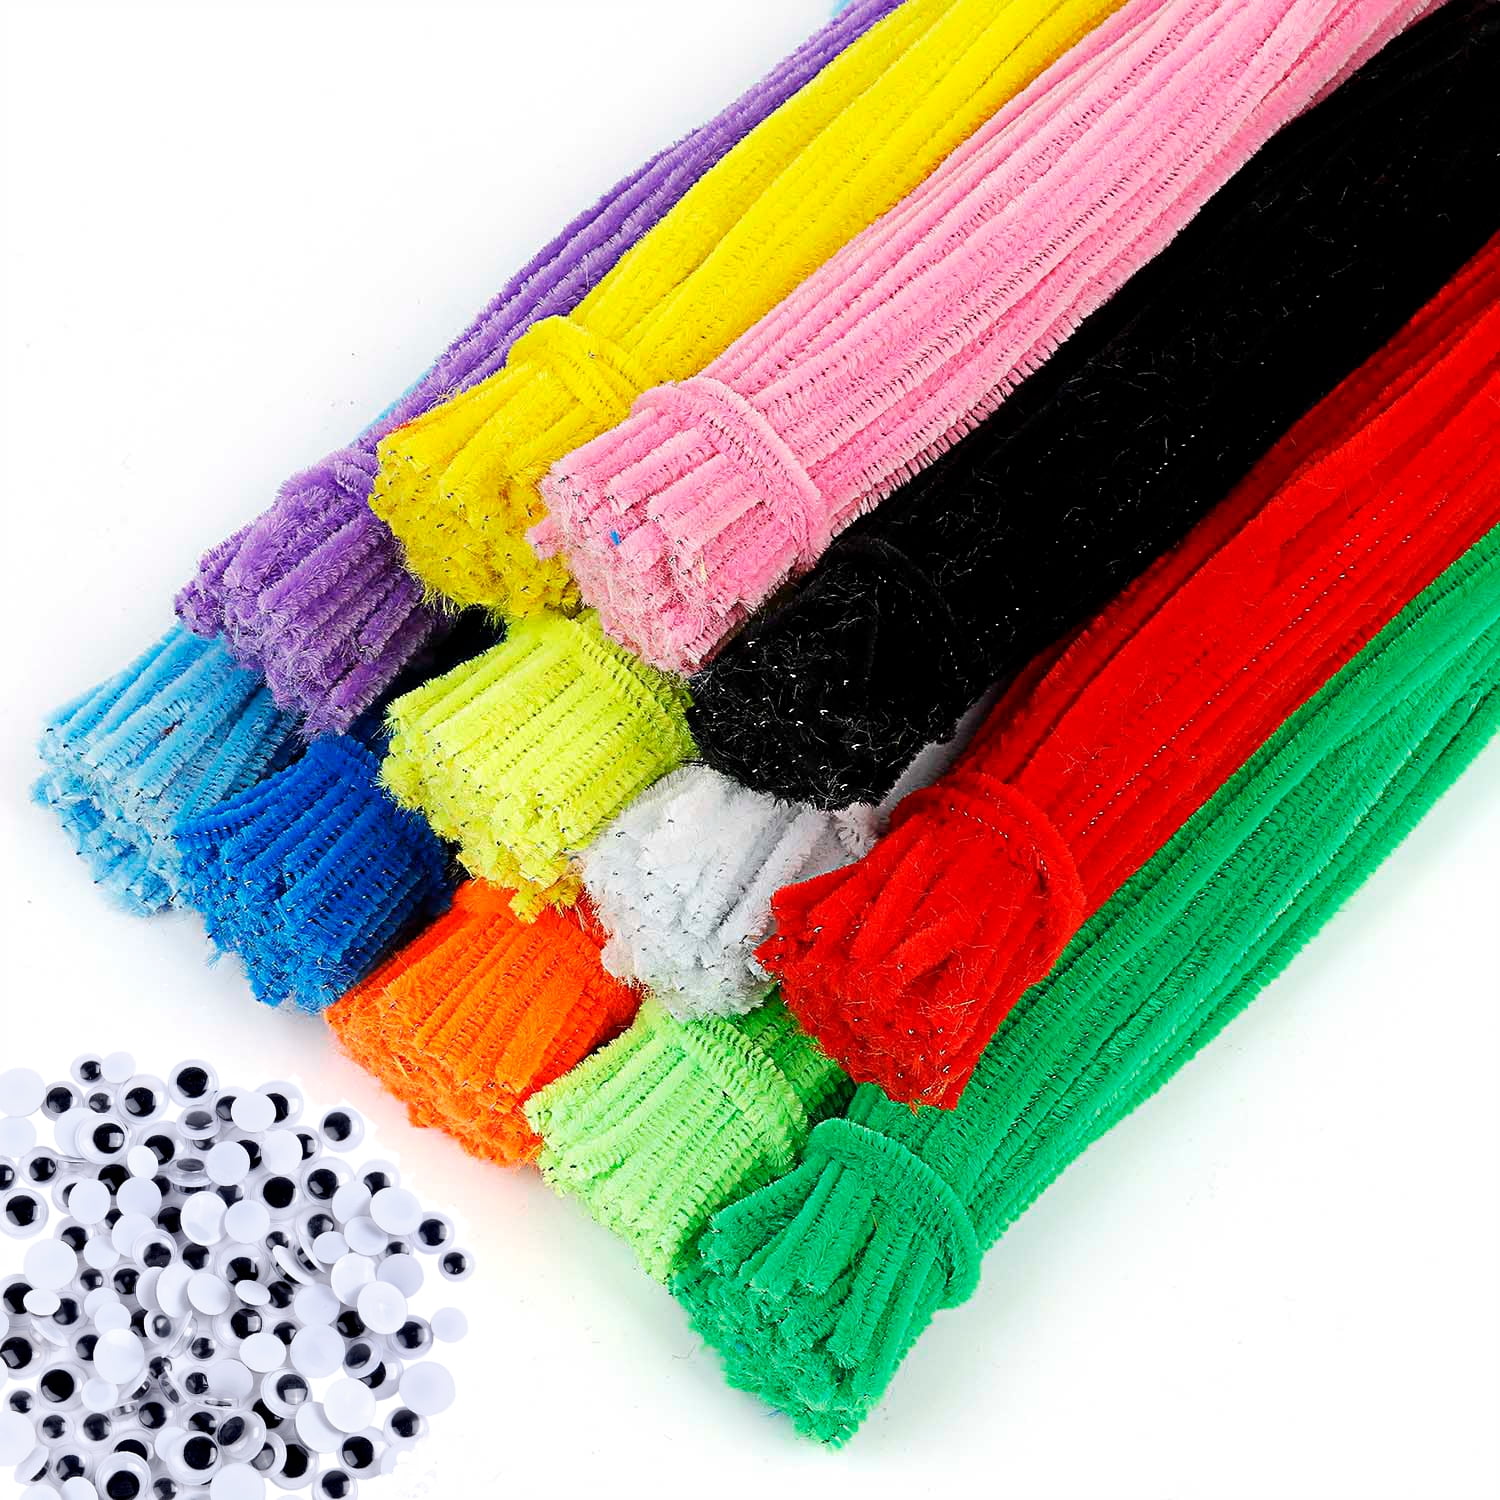 6mm wide 10 pack DARK RED chenille craft stems pipe cleaners 30cm long 